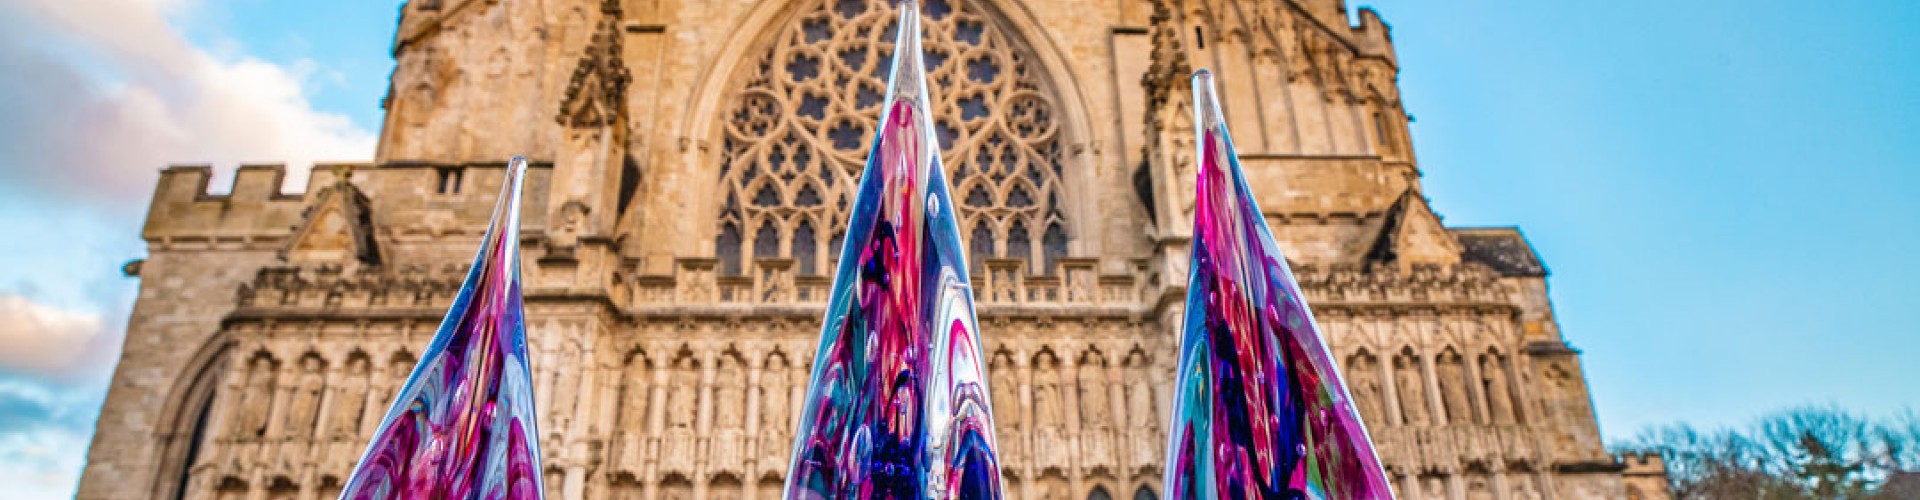 Exeter cathedral with 3 glass awards 